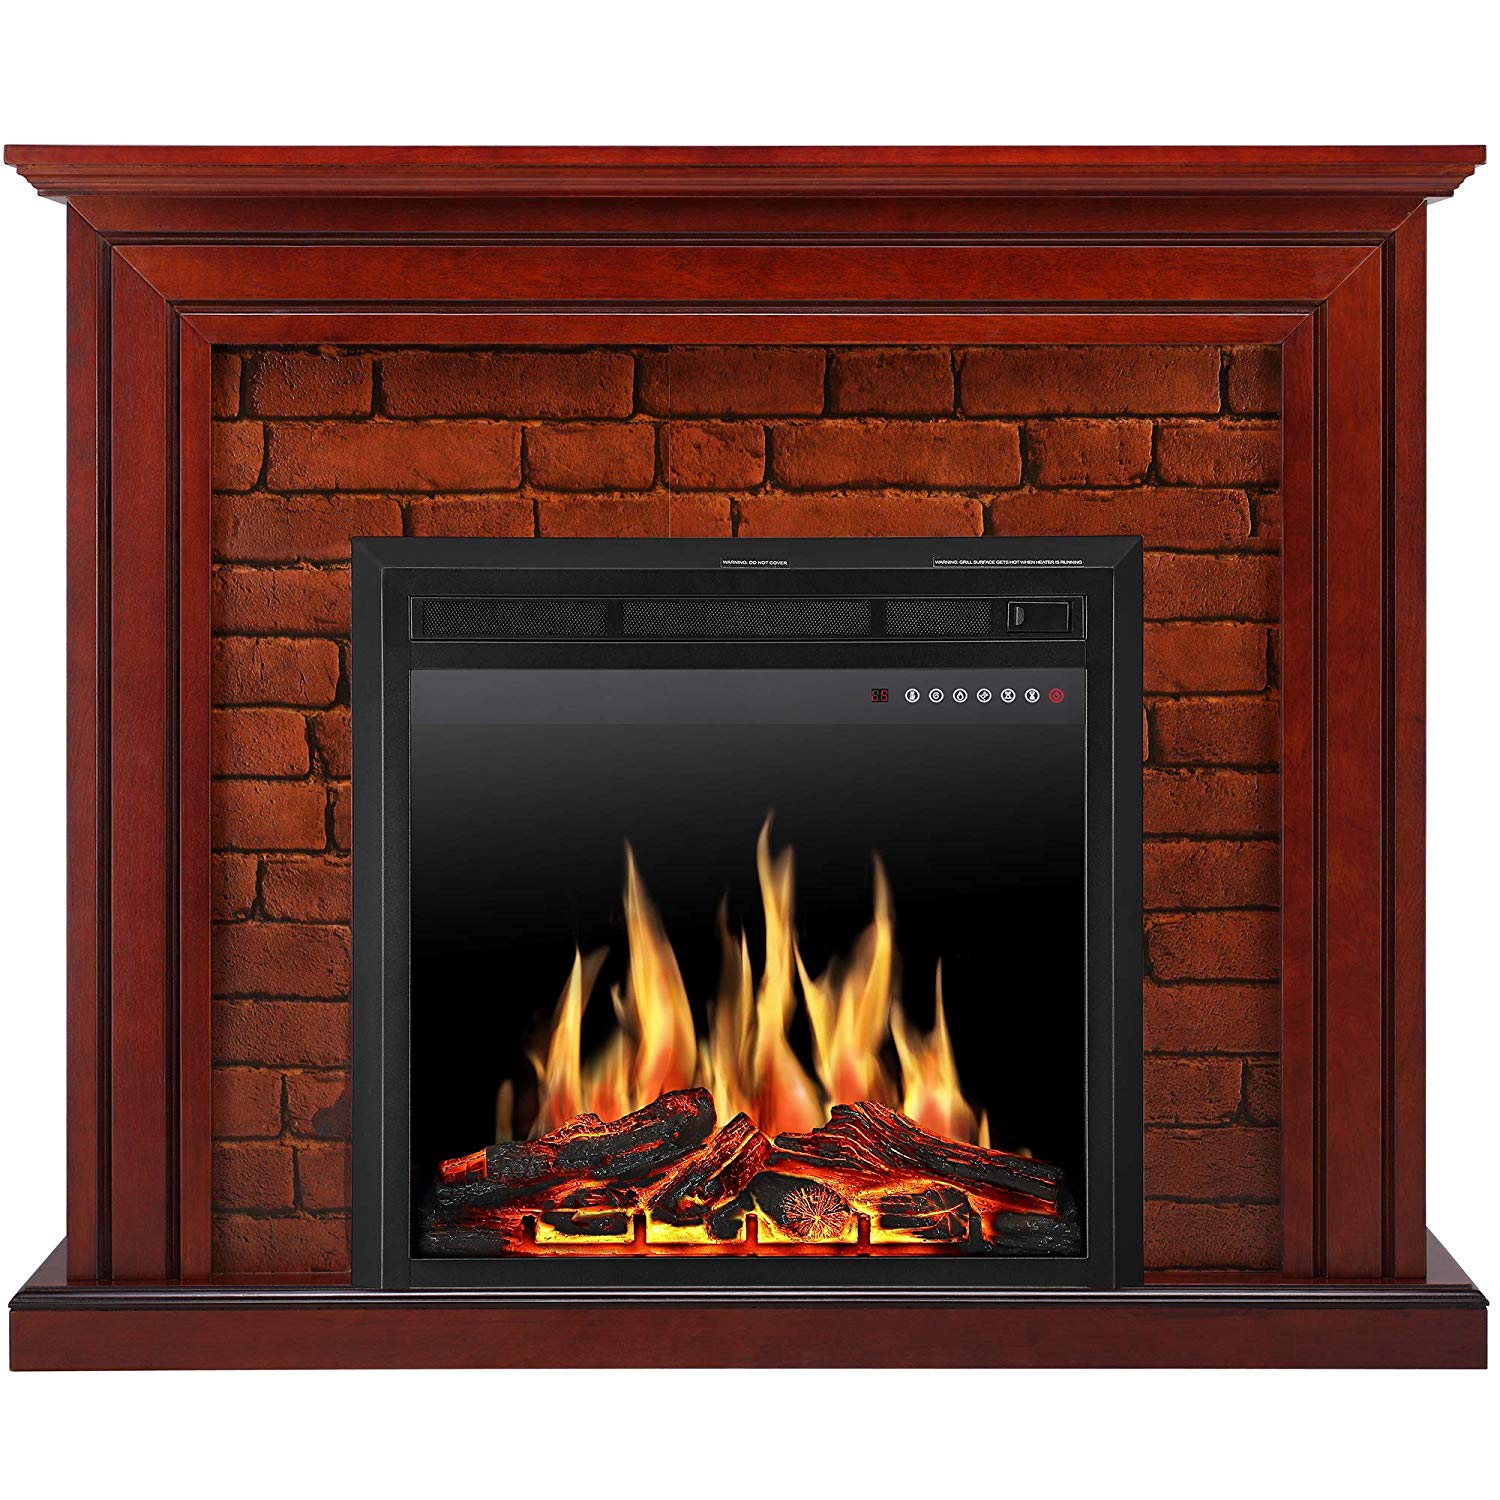 Electric Fireplaces Direct Outlet New Jamfly Electric Fireplace Mantel Package Traditional Brick Wall Design Heater with Remote Control and Led touch Screen Home Accent Furnishings